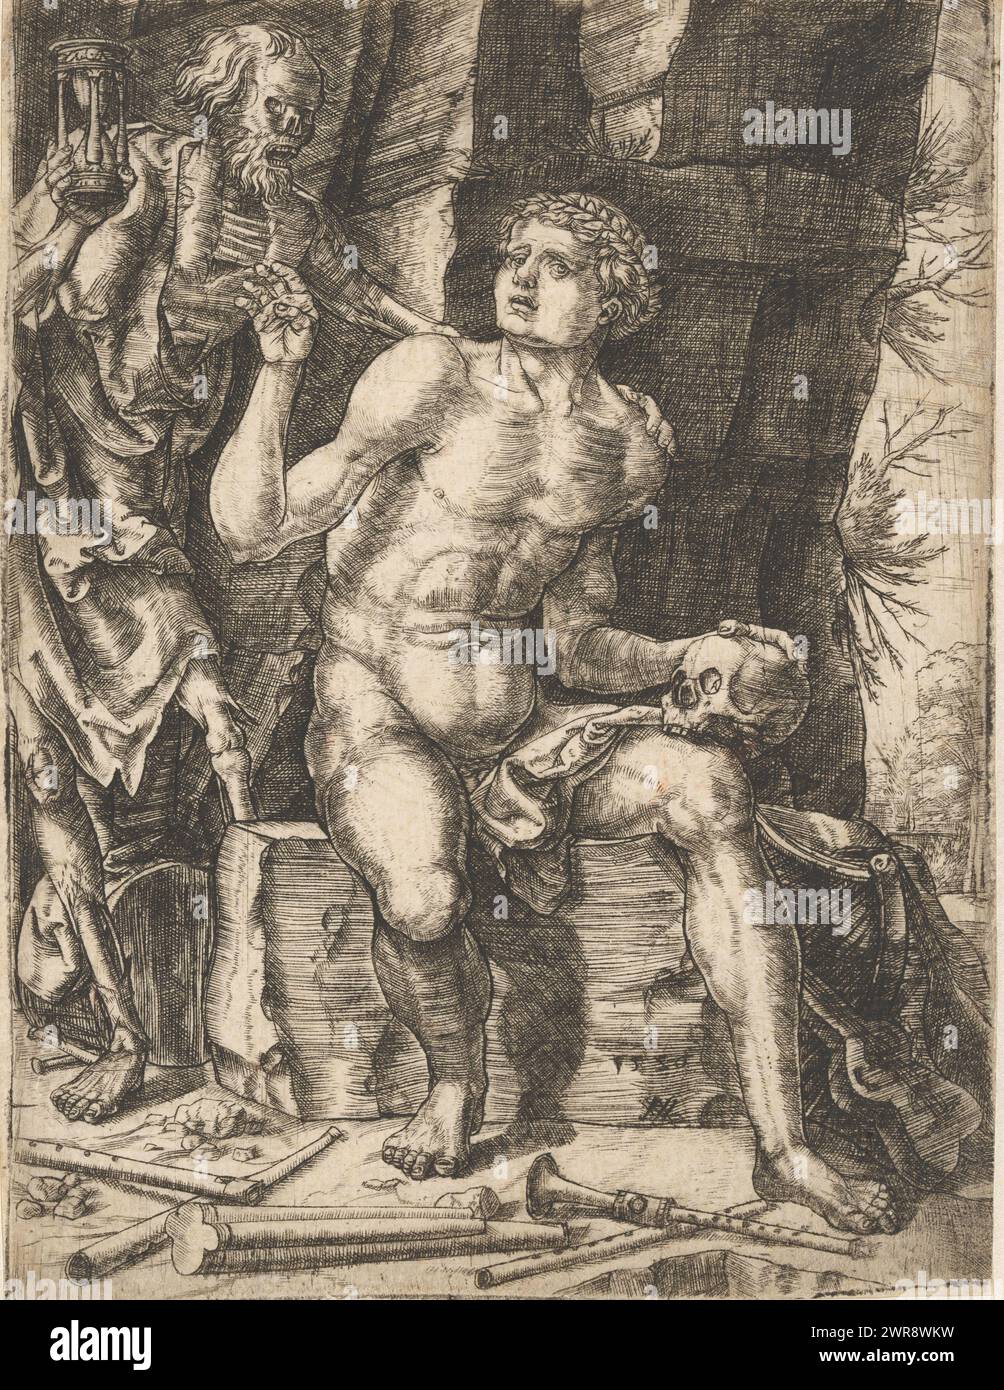 Death and the musician, print maker: Anton von Woensam, Cologne, 1526, paper, engraving, height 138 mm × width 103 mm, print Stock Photo